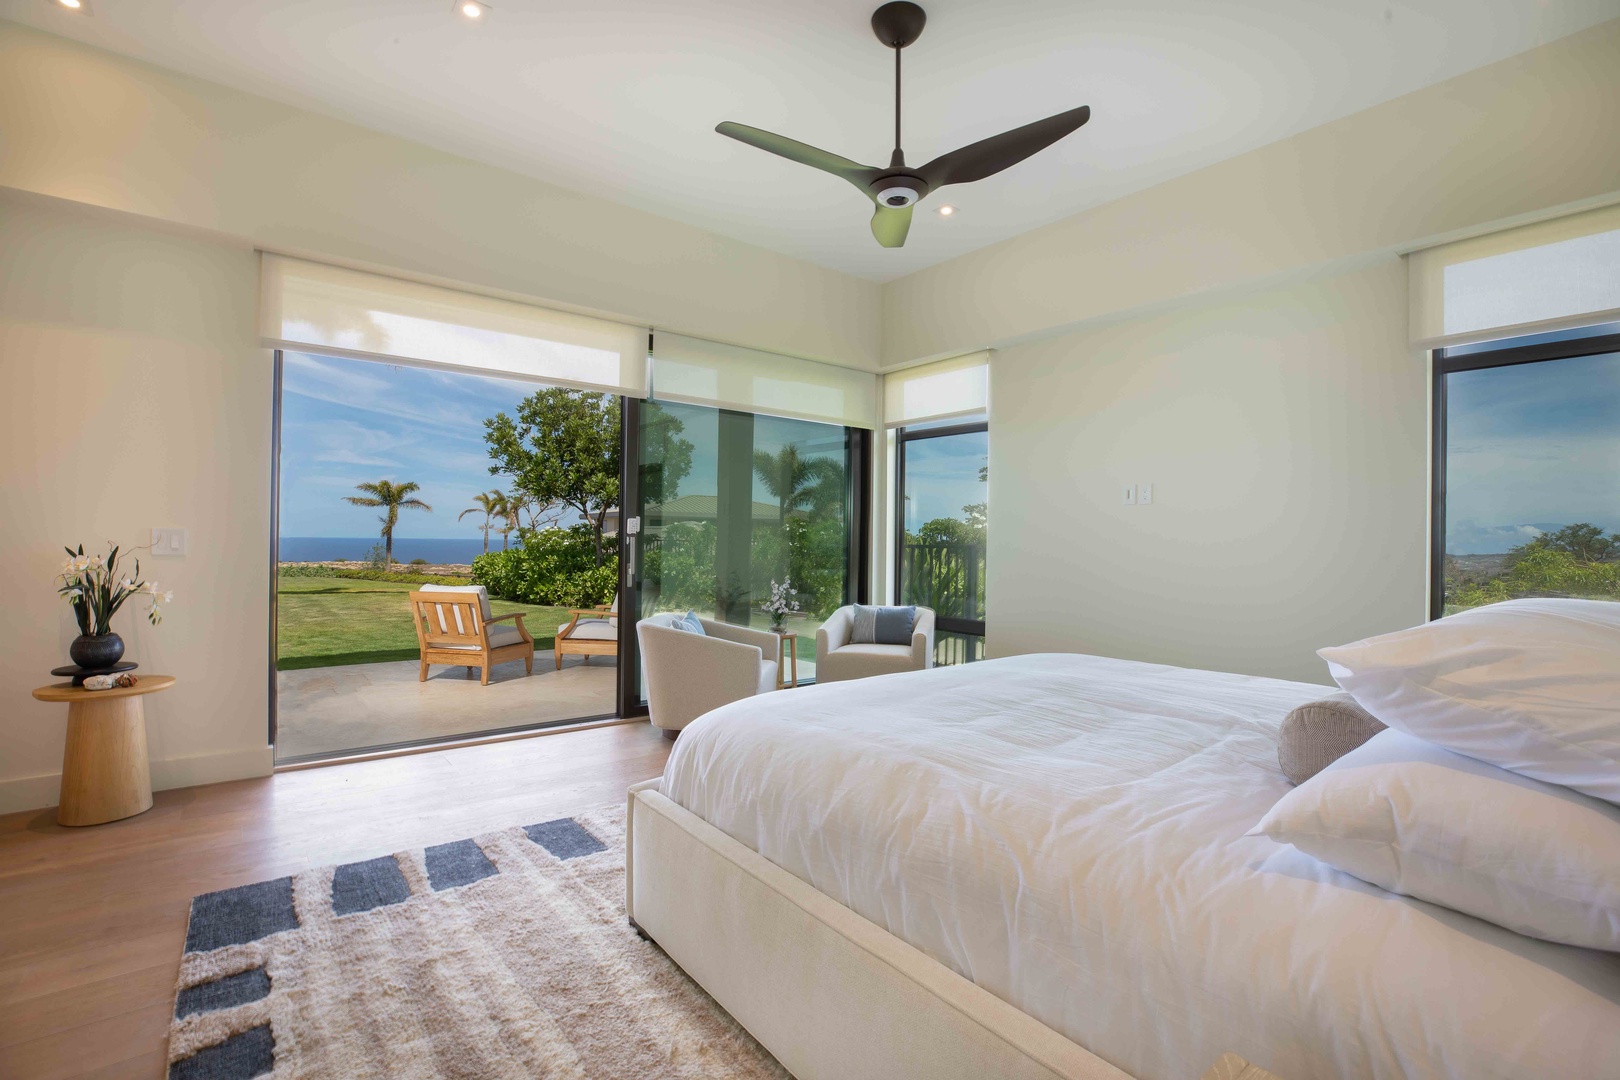 Kamuela Vacation Rentals, Hapuna Estates #8 - Master Suite 1 offers ocean views and a private lanai